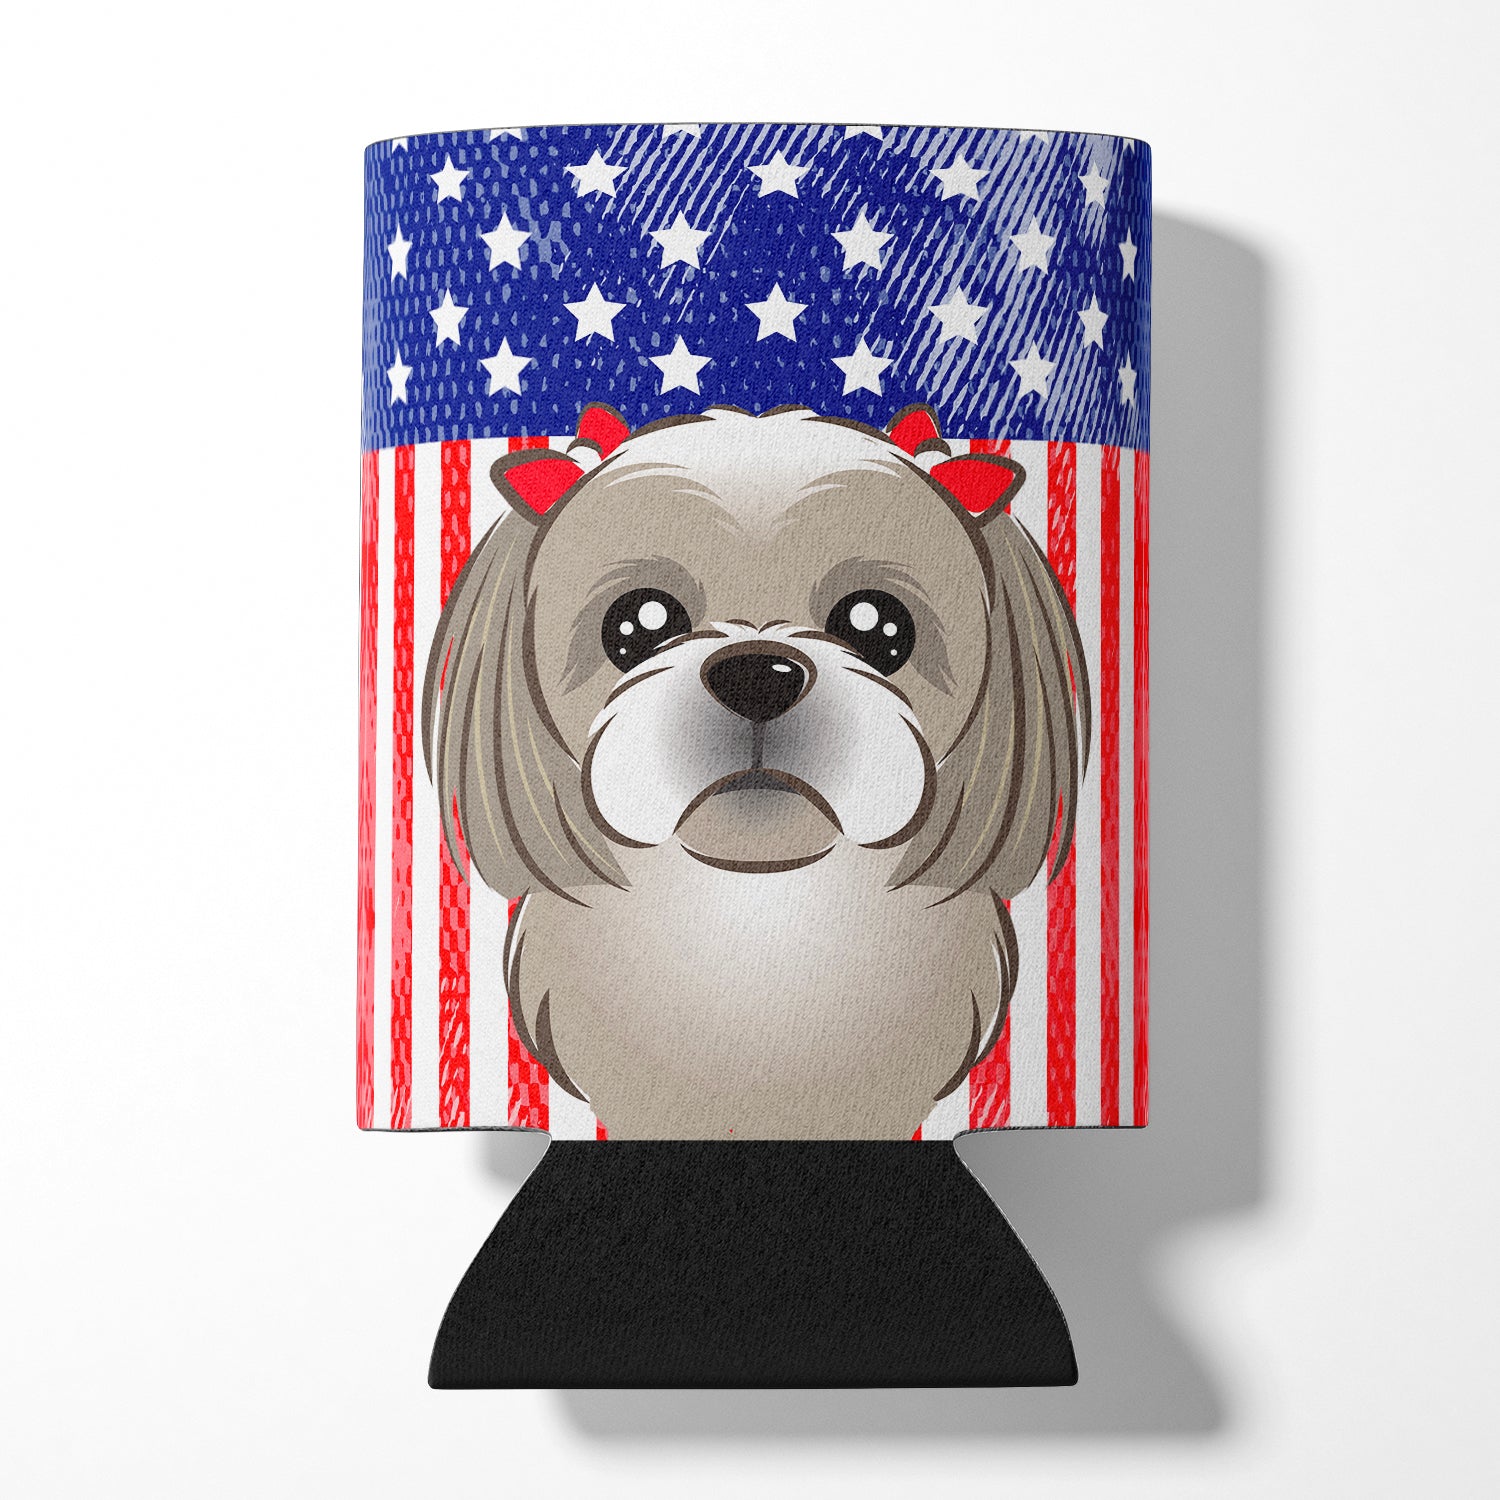 American Flag and Gray Silver Shih Tzu Can or Bottle Hugger BB2180CC.